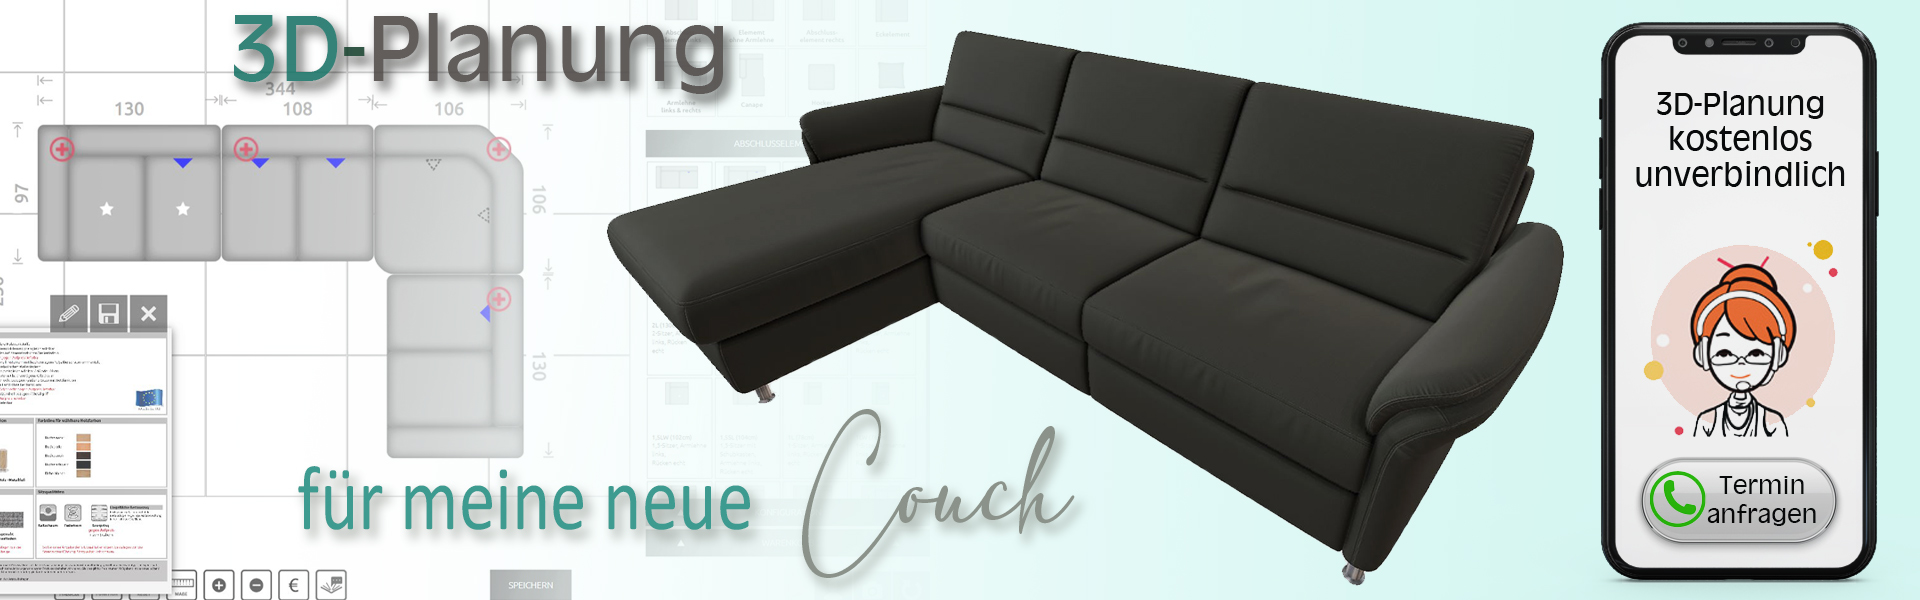 3D-Couchplanung